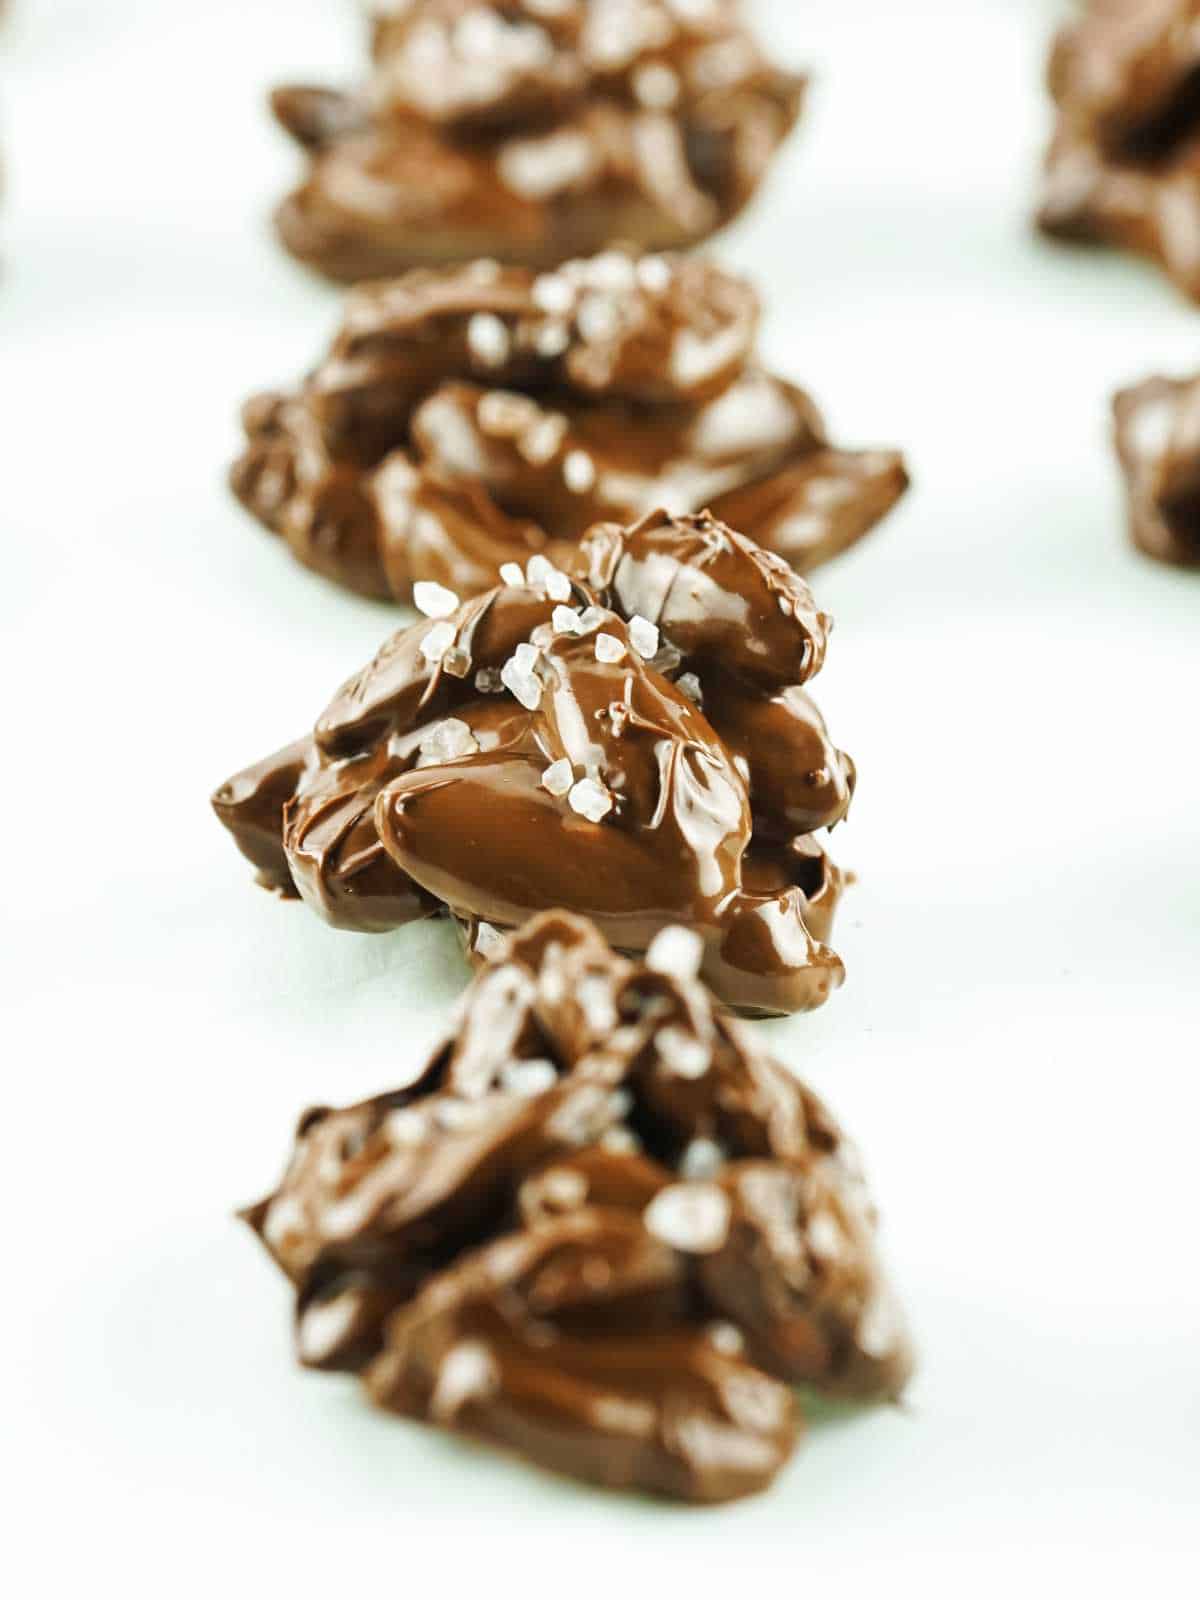 rows of chocolate candies firming up on parchment paper.